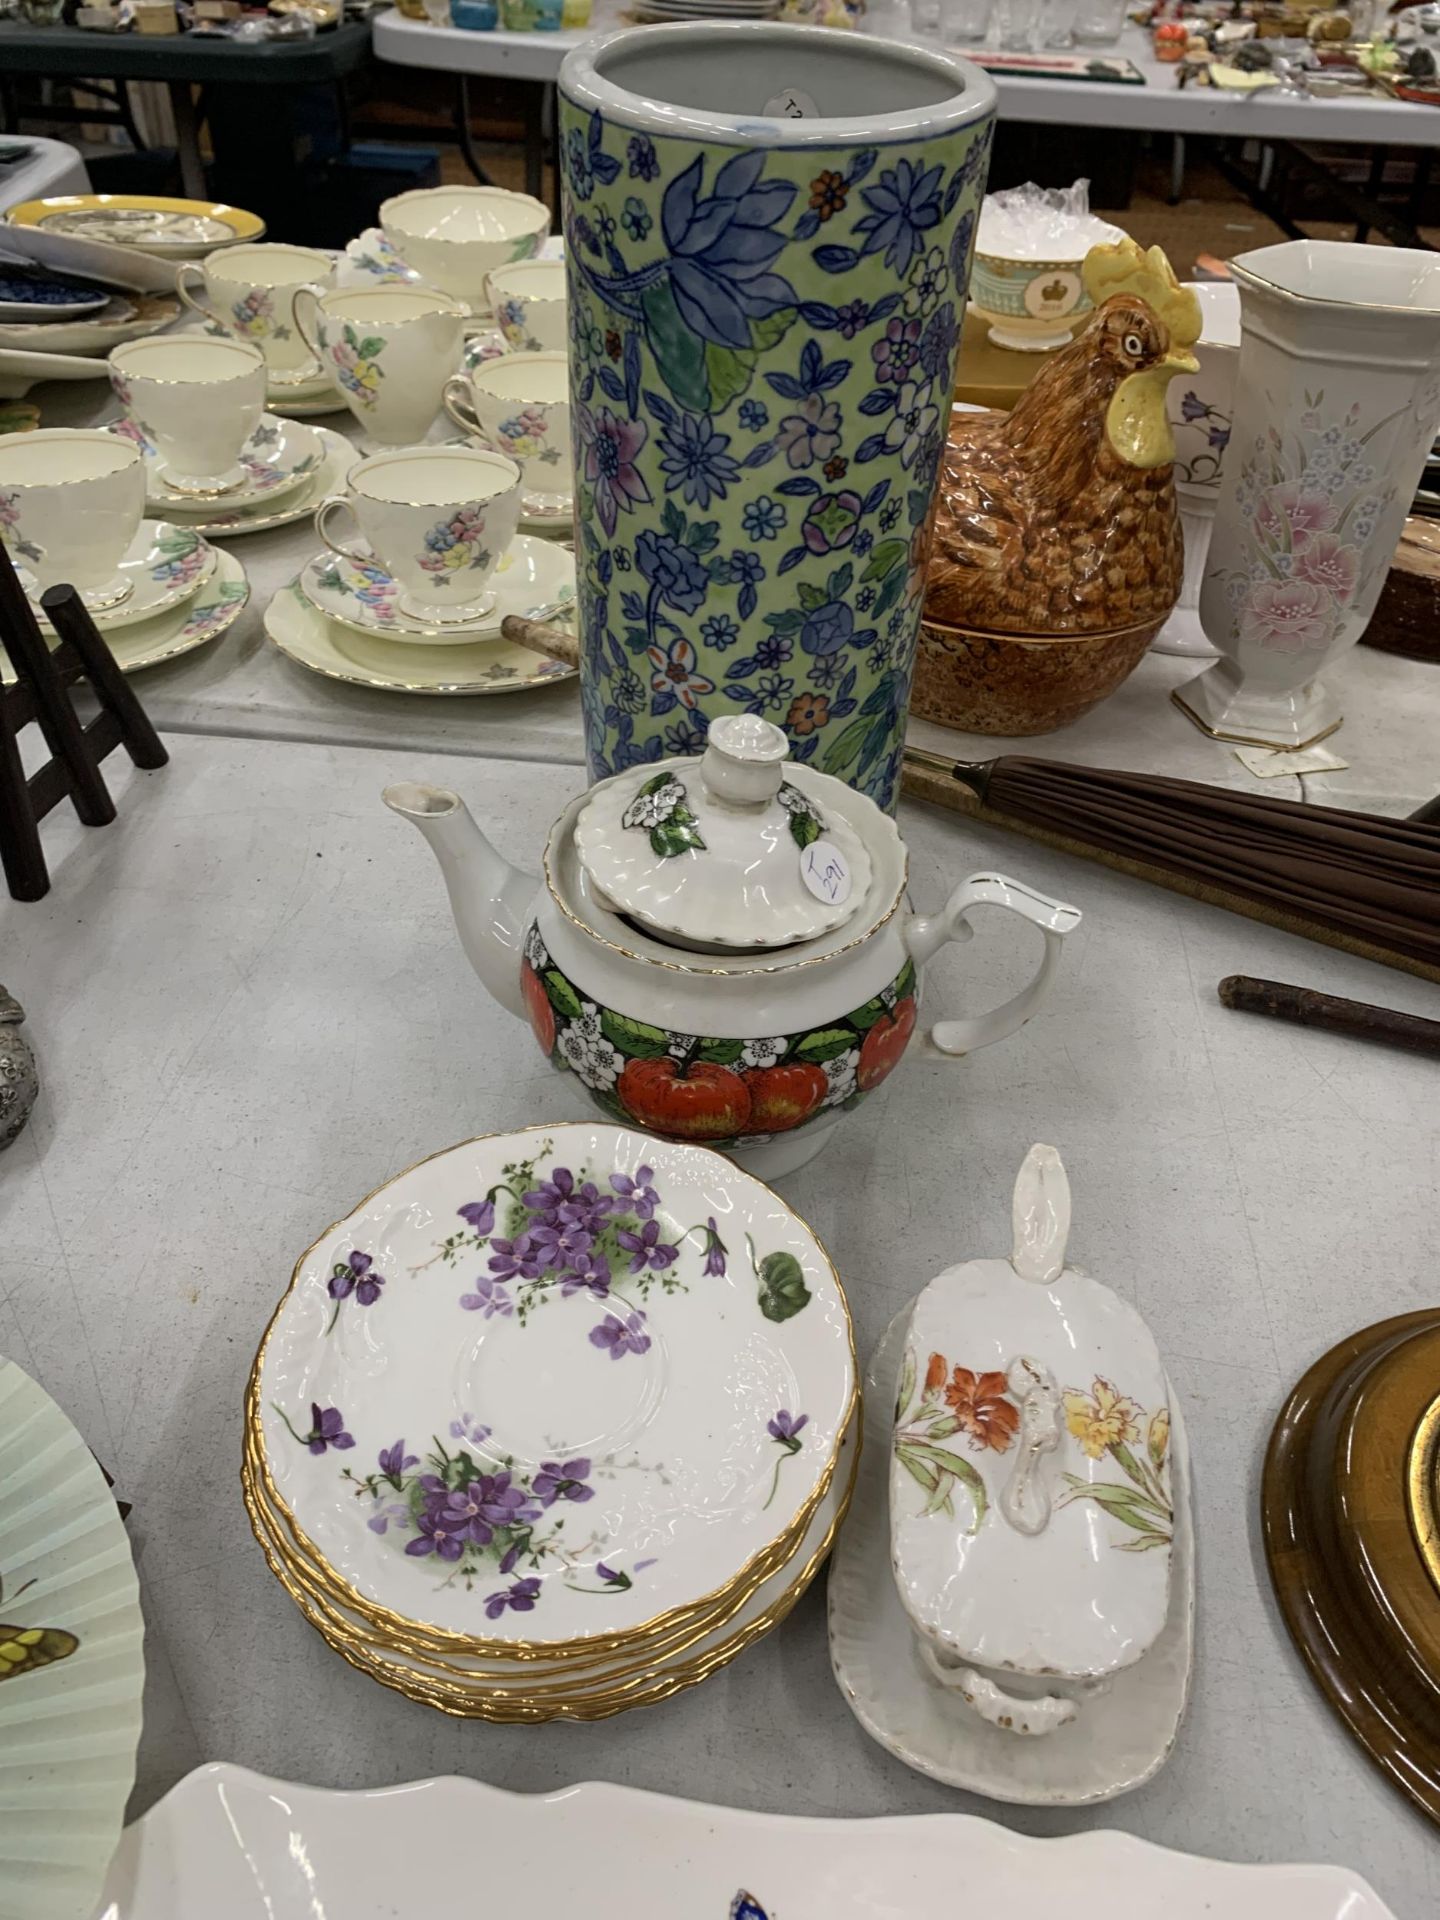 A QUANTITY OF CERAMIC ITEMS TO INCLUDE AYNSLEY SANDWICH TRAYS, A VASE, TEAPOT, PLATES, ETC - Image 5 of 6